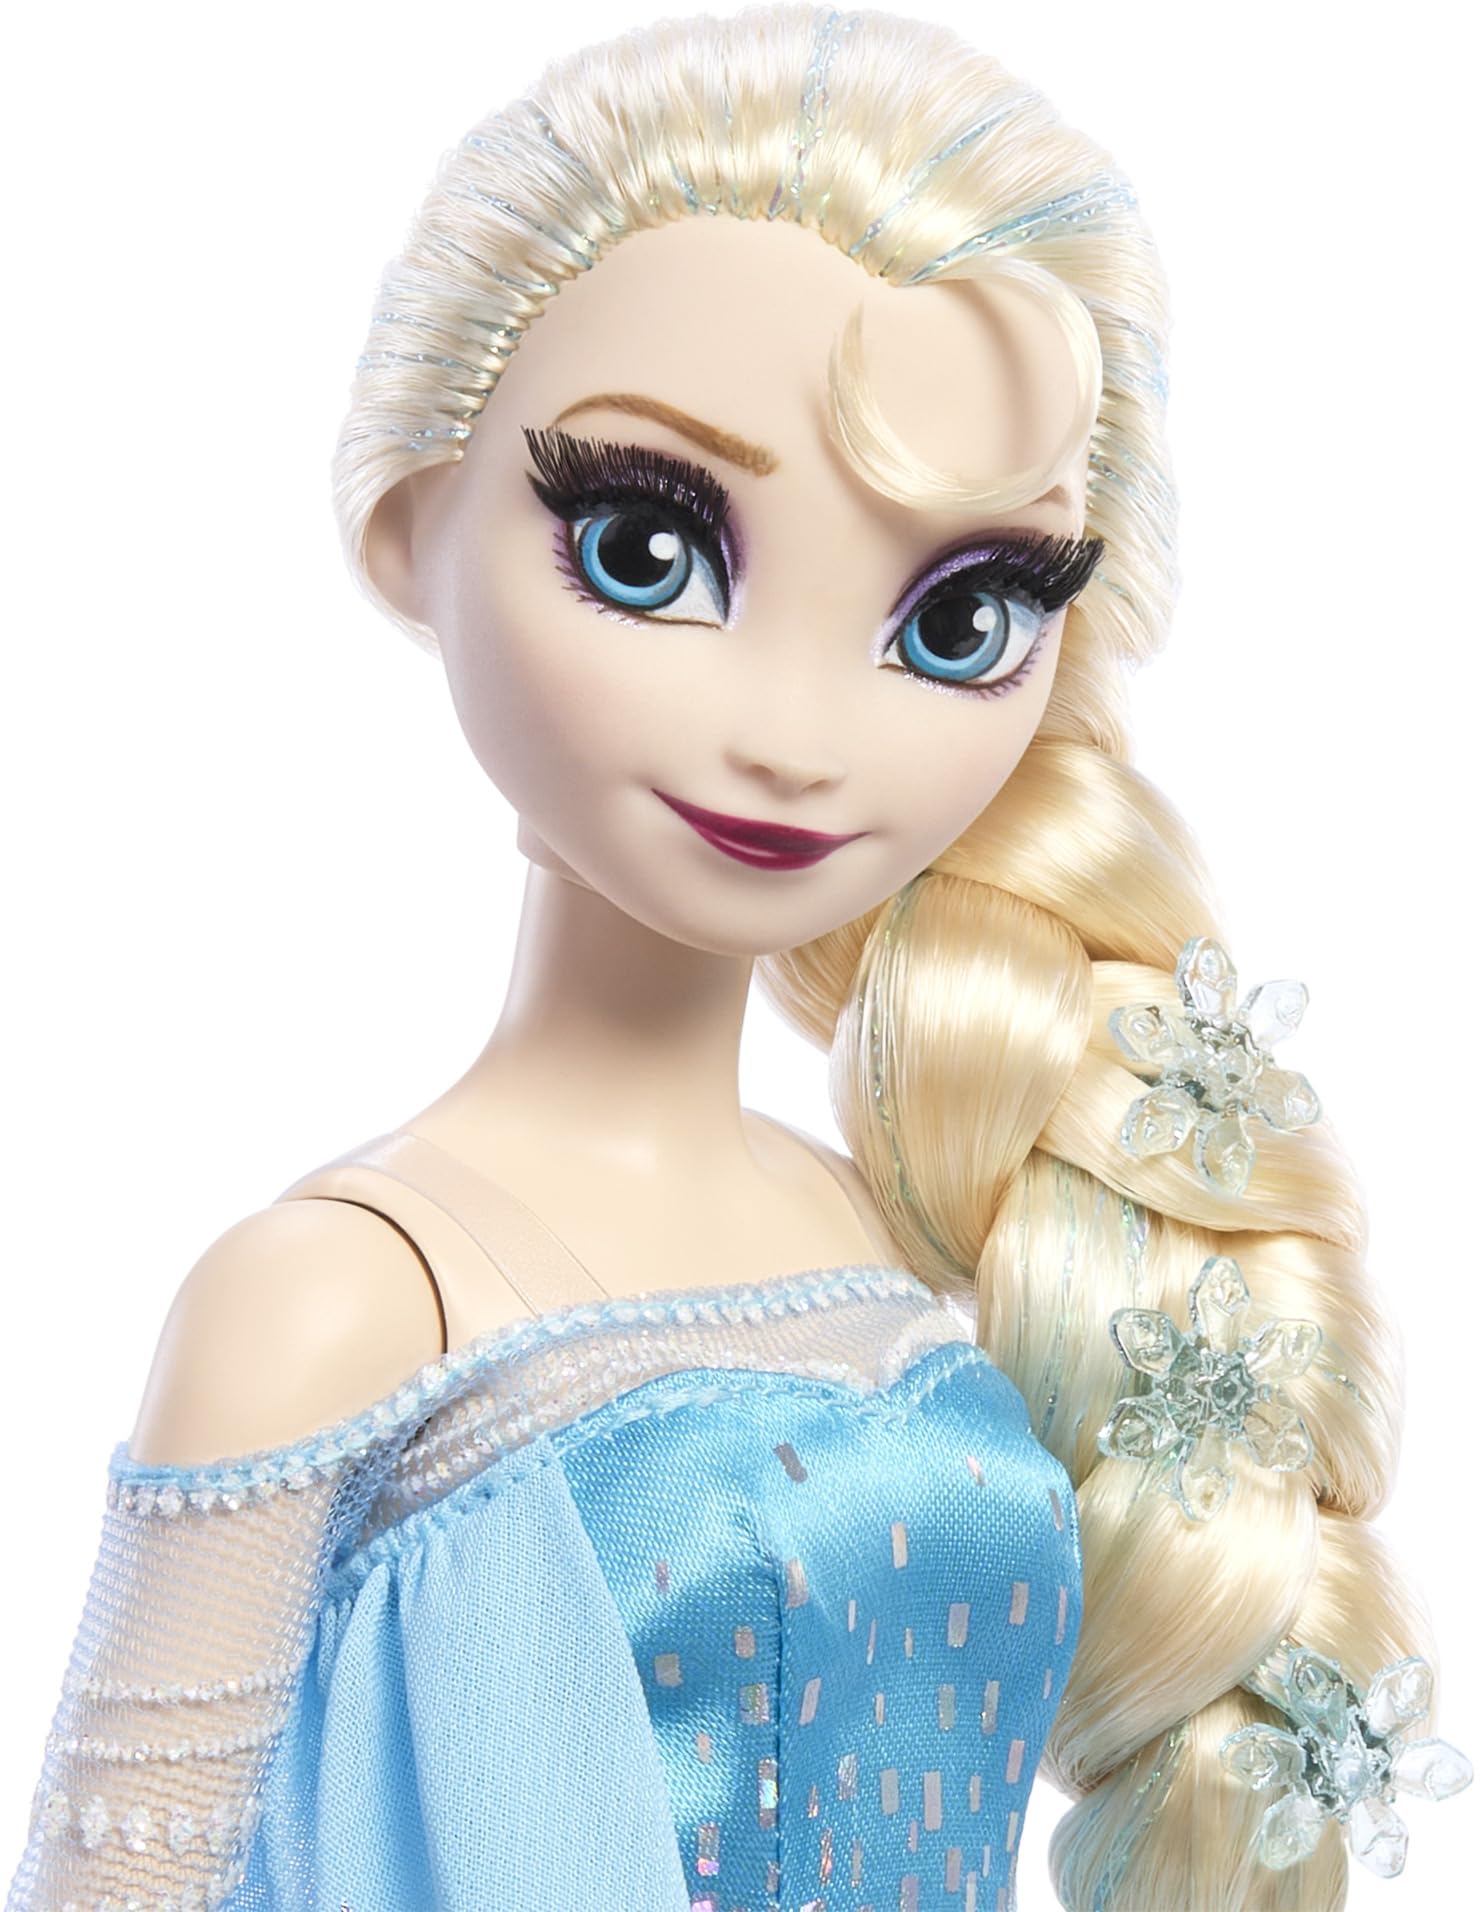 Mattel Disney Frozen Anna and Elsa Collector Dolls to Celebrate Disney 100 Years of Wonder, Inspired by Disney Frozen Movie, Gifts for Kids and Collectors